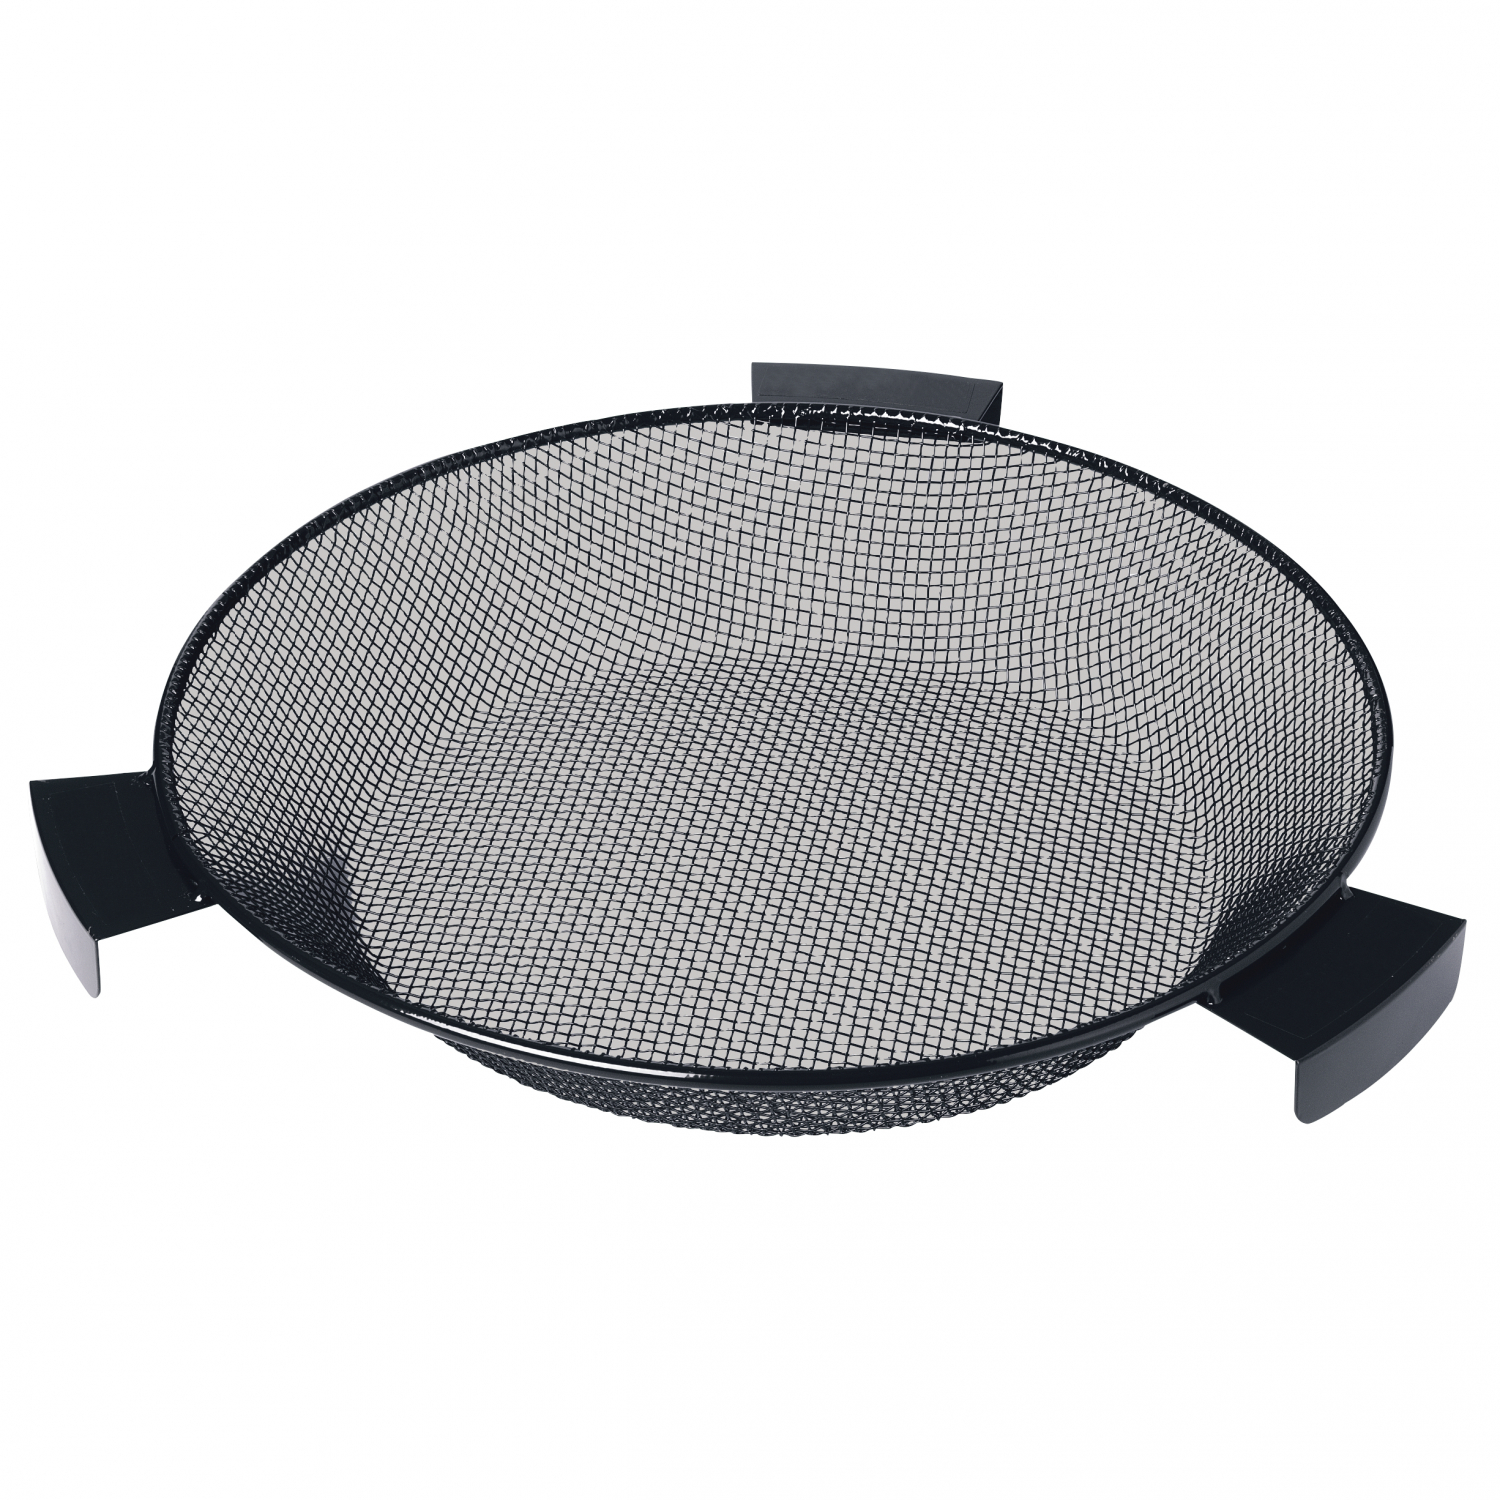 Fishing Bait Sieve and How to Use It Yourself?